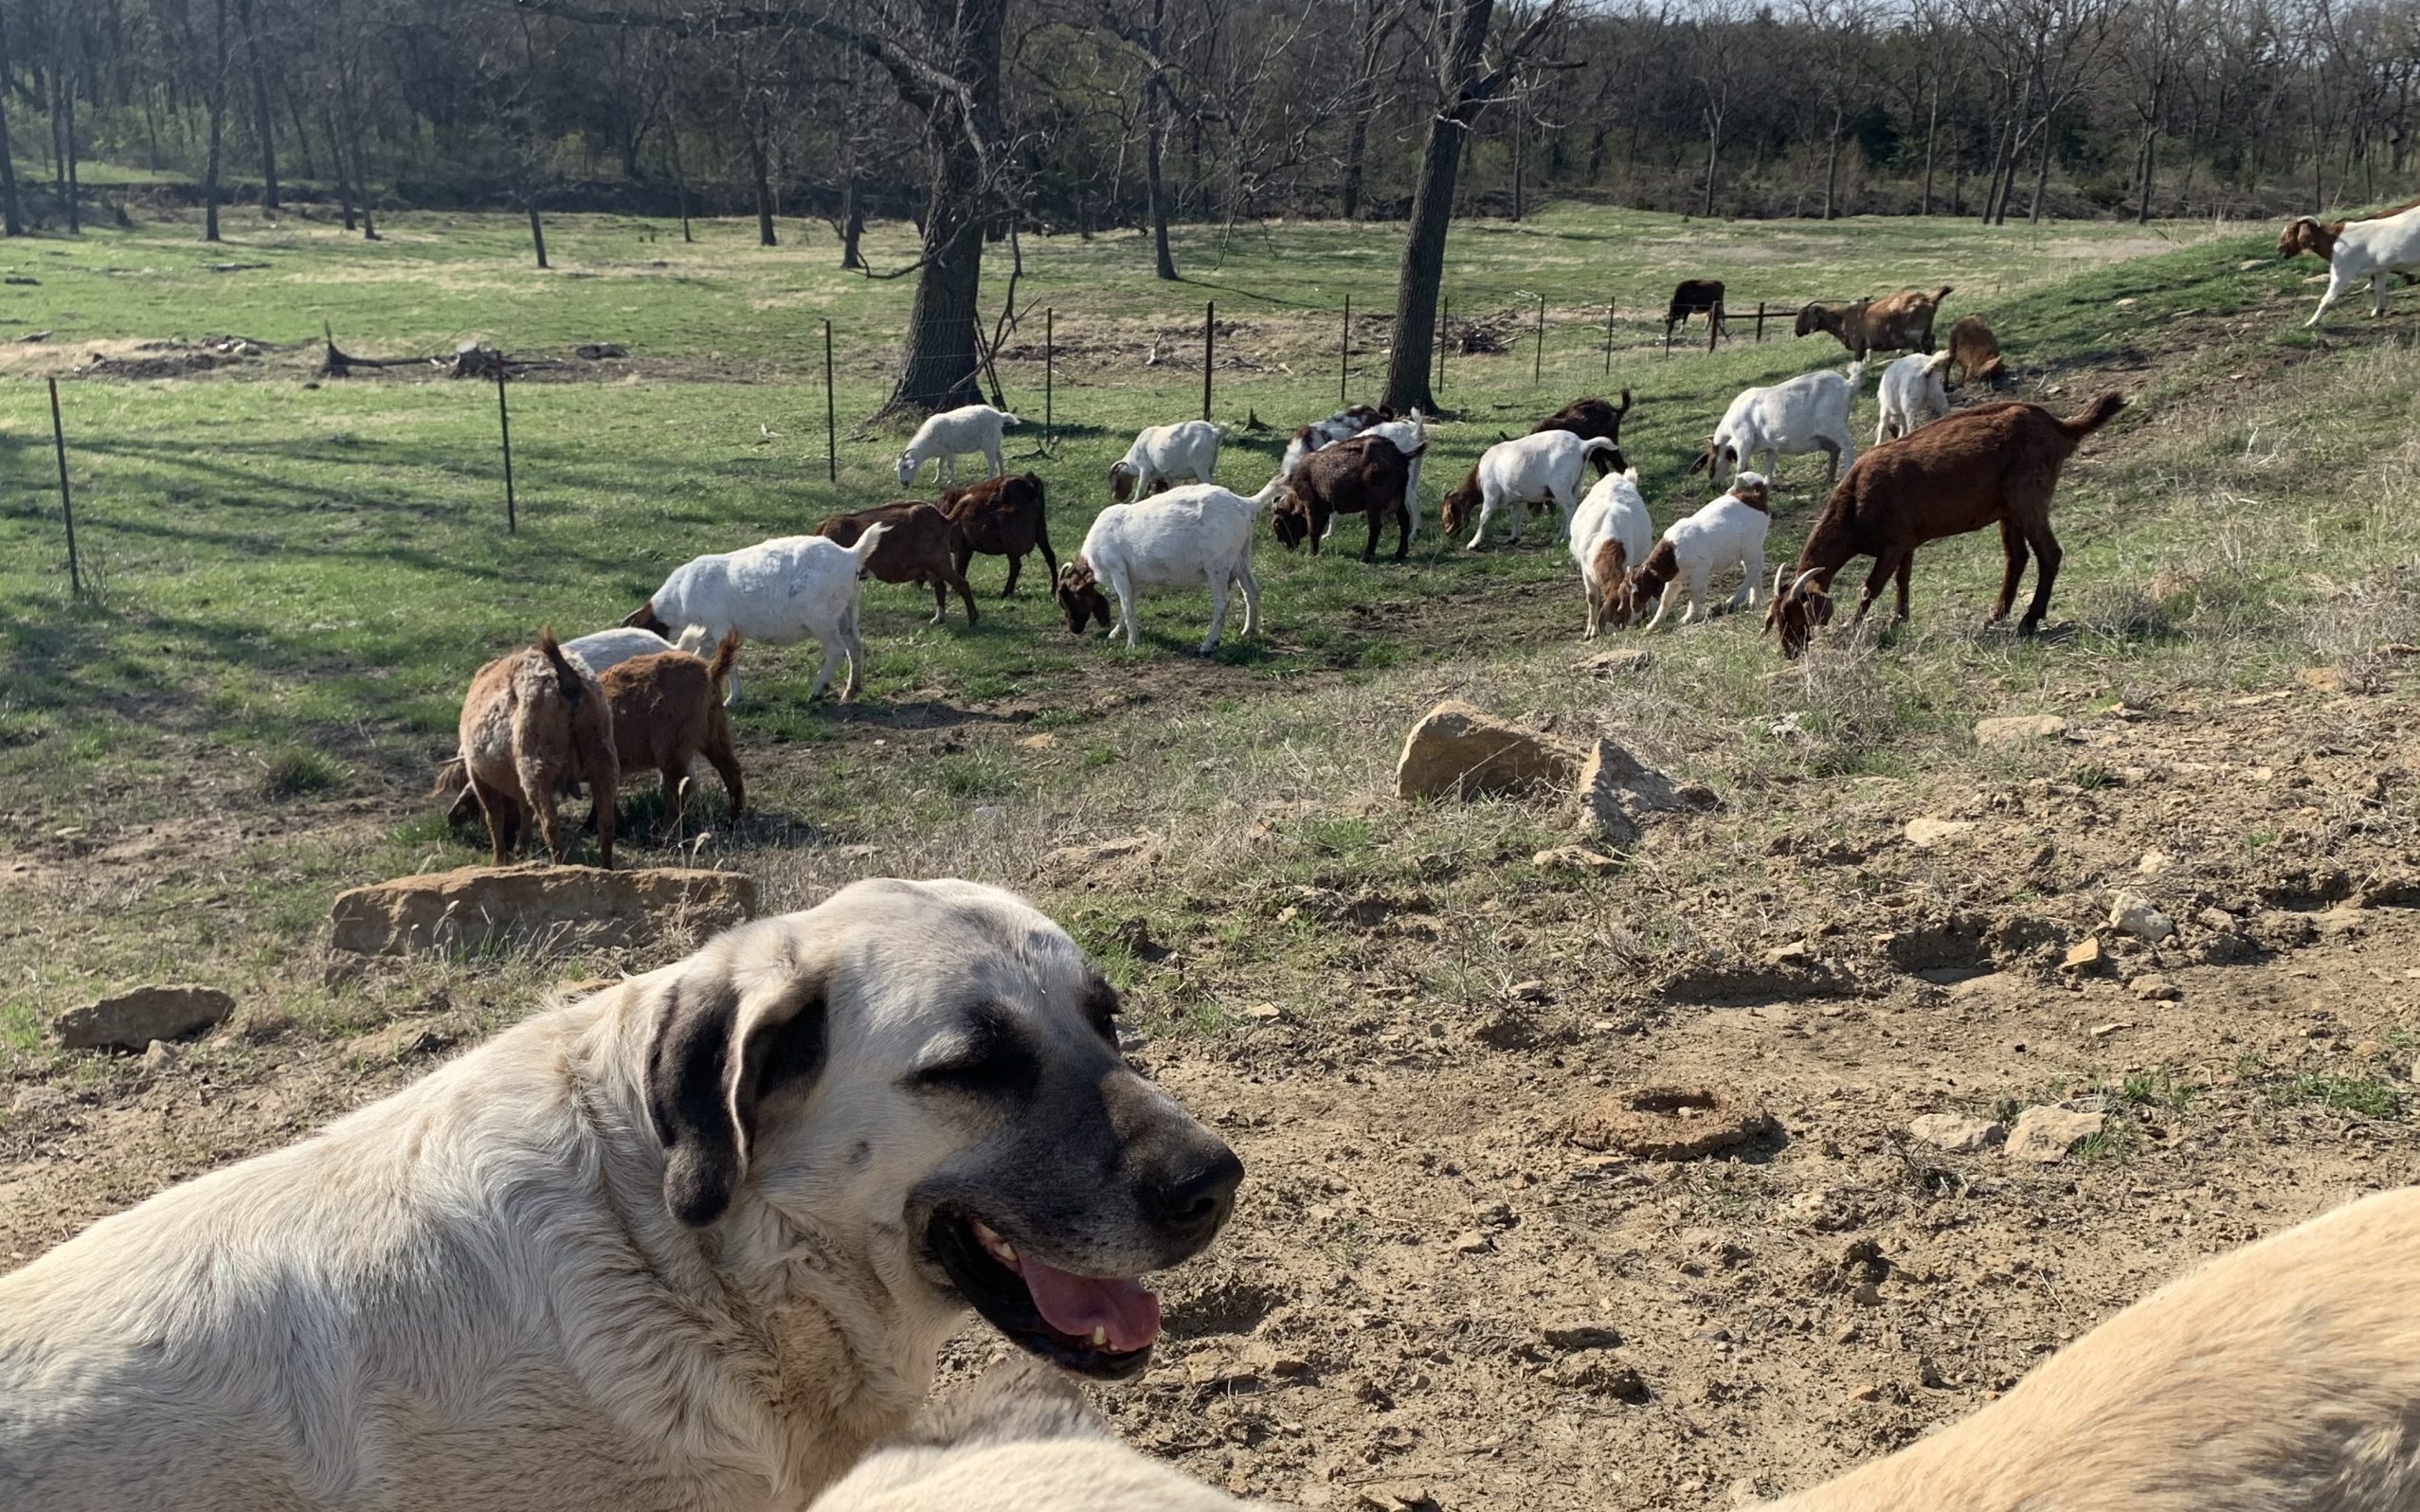 Livestock guardian dogs are watching over their goats.